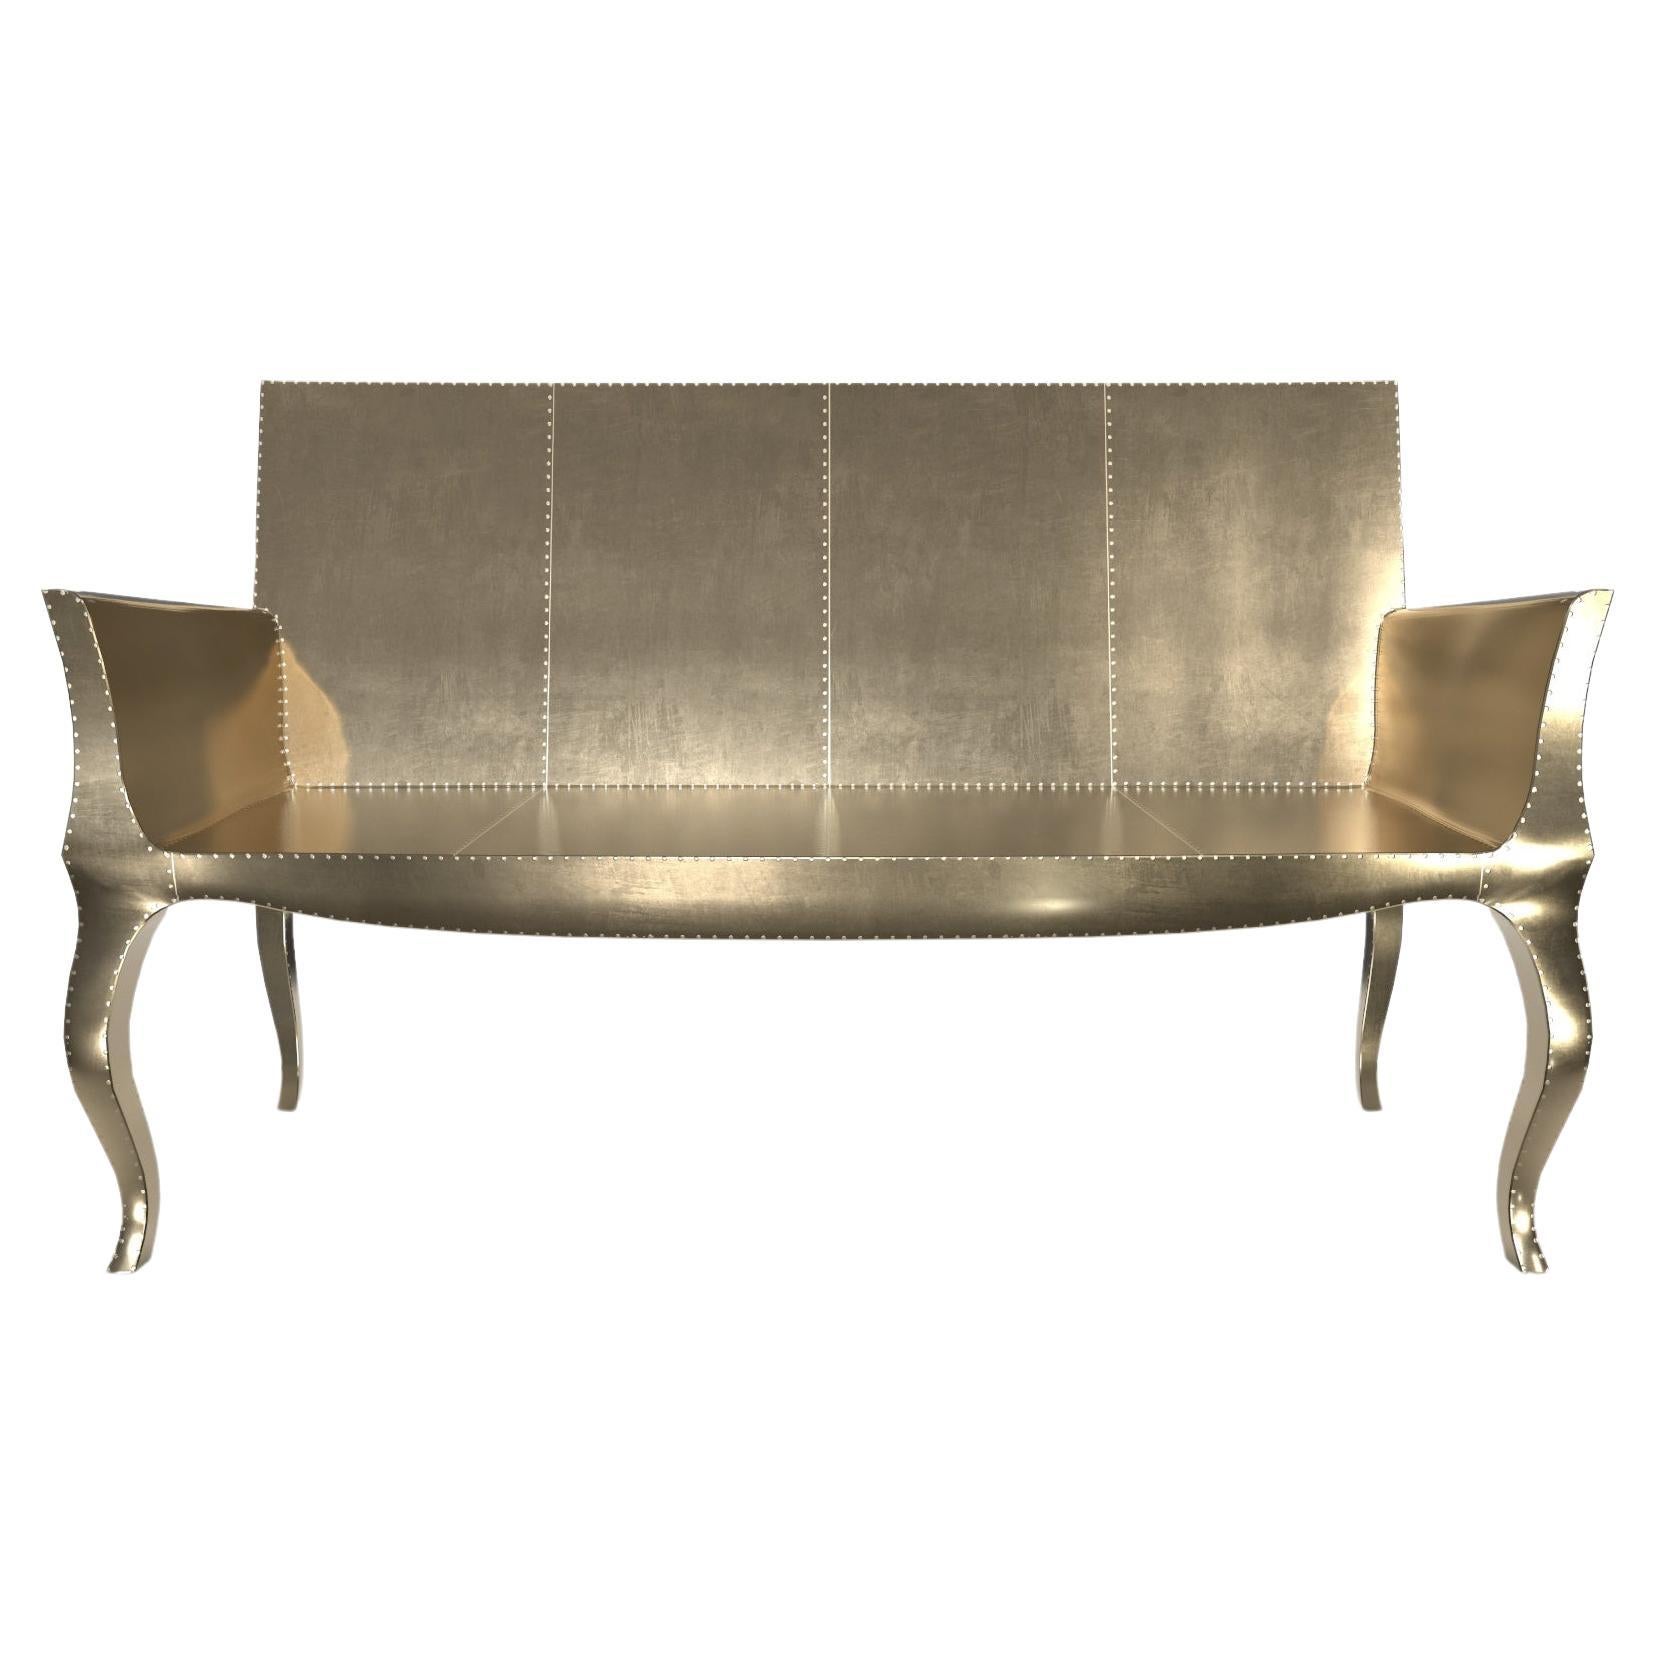 Louise Settee Art Deco Benches in Smooth Copper by Paul Mathieu for S Odegard For Sale 5